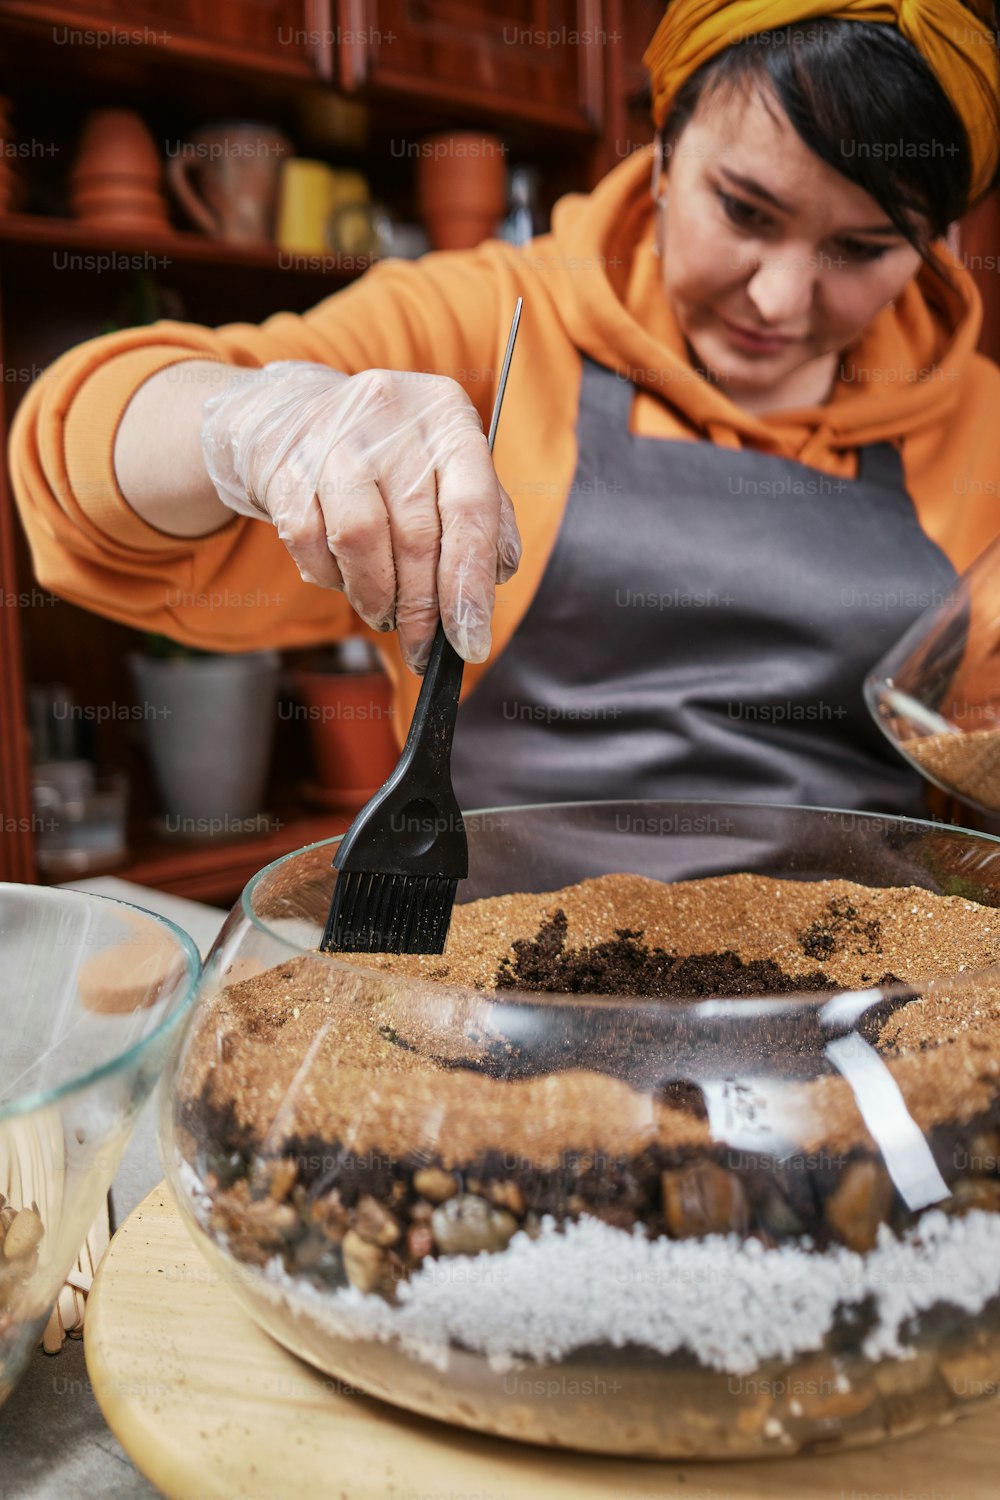 a woman in an orange hoodie is cutting a cake